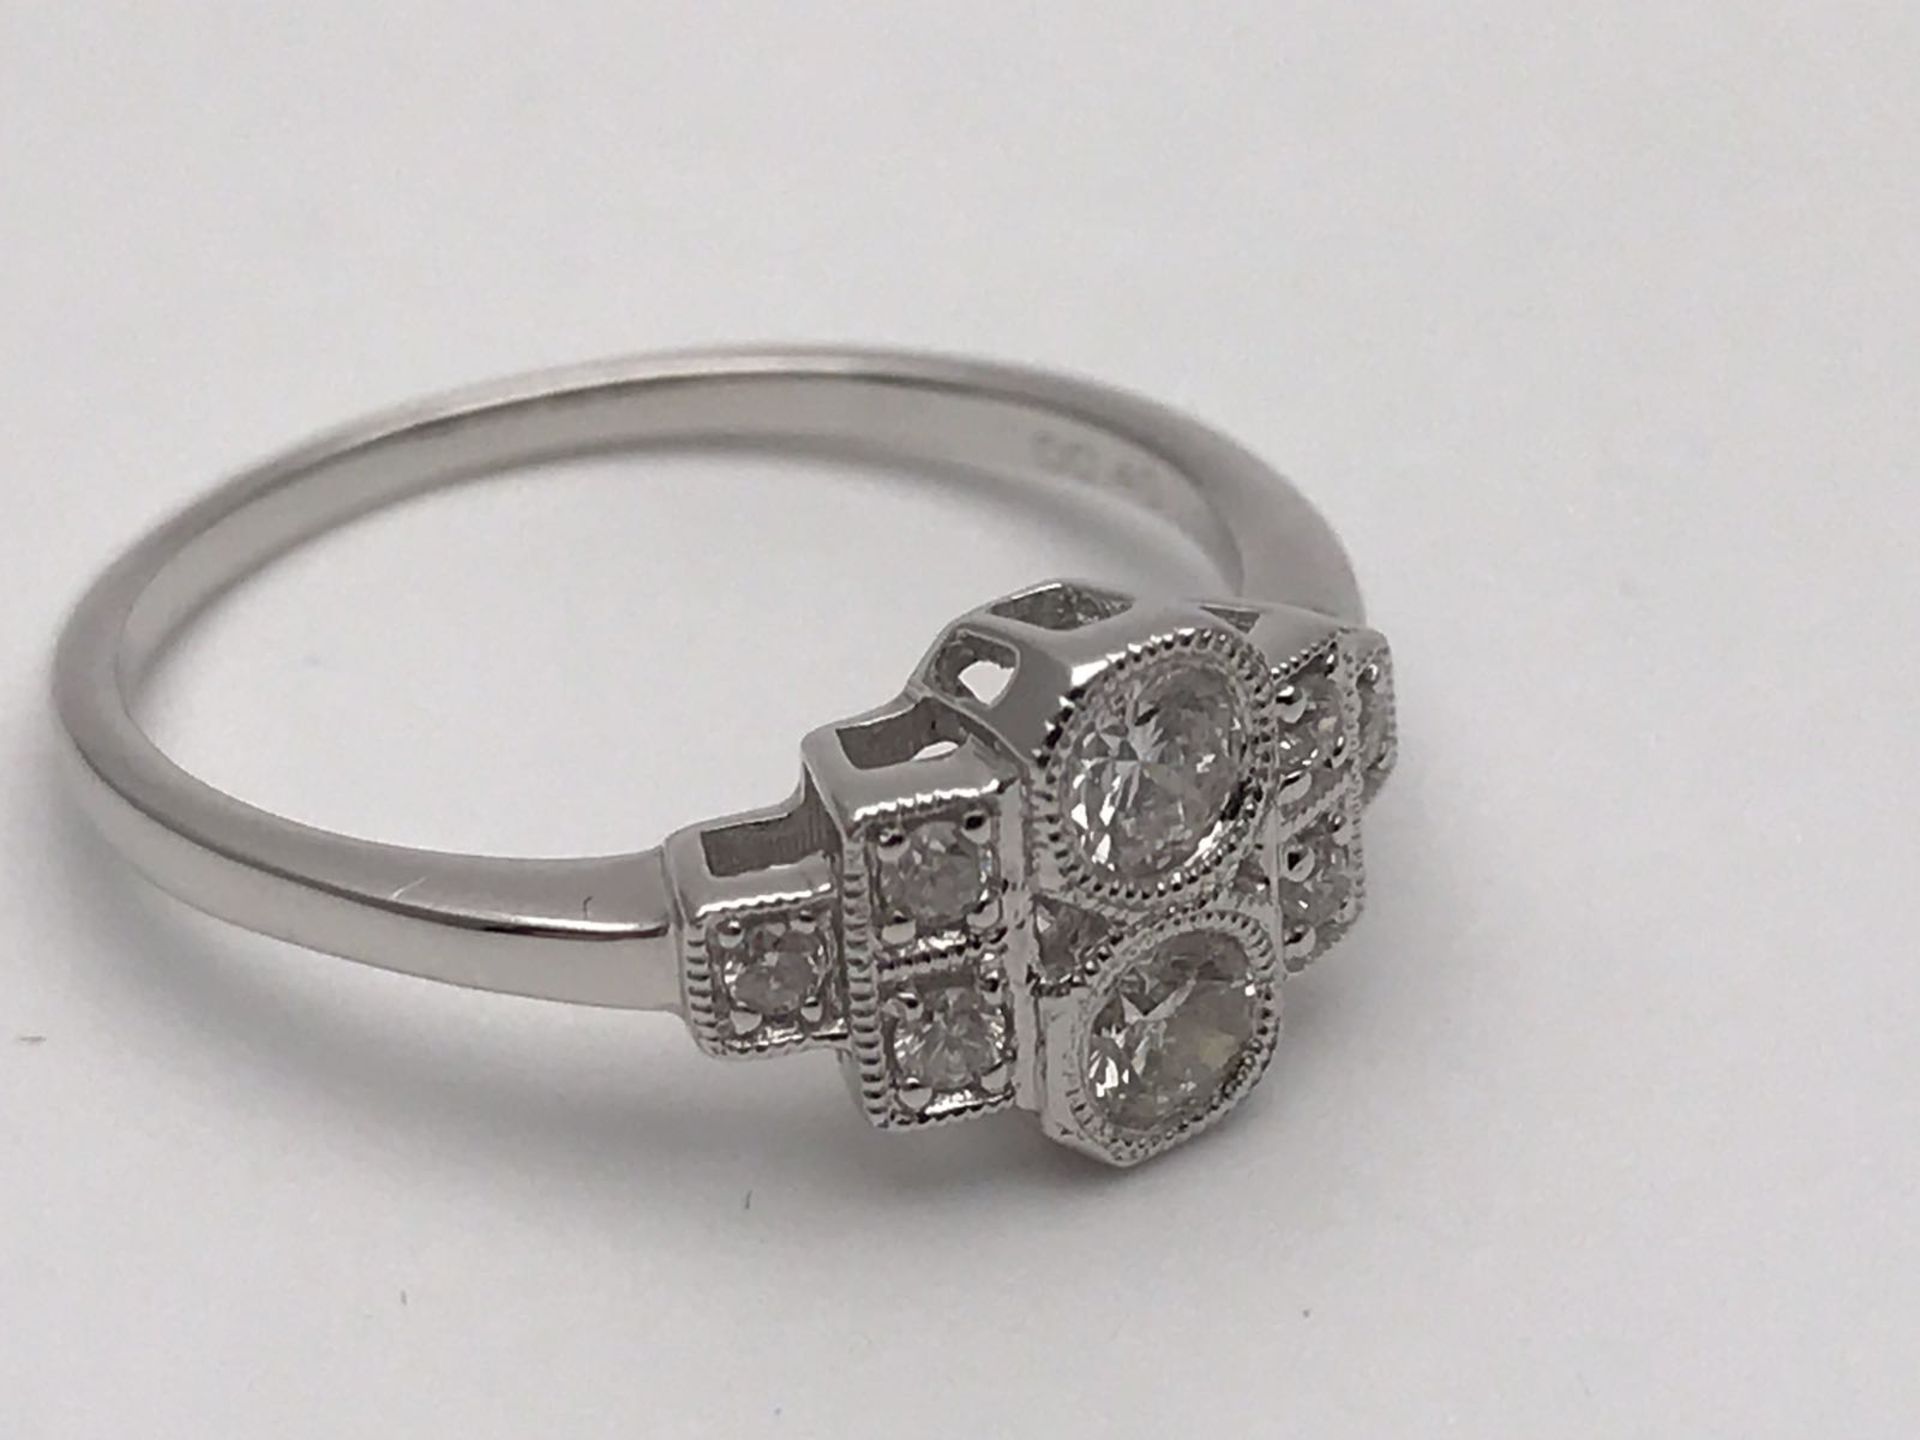 RRP £3000 A STUNNING WHITE GOLD DIAMOND RING COMPRISING 8 BRILLIANT ROUND DIAMONDS OF TOP QUALITY-